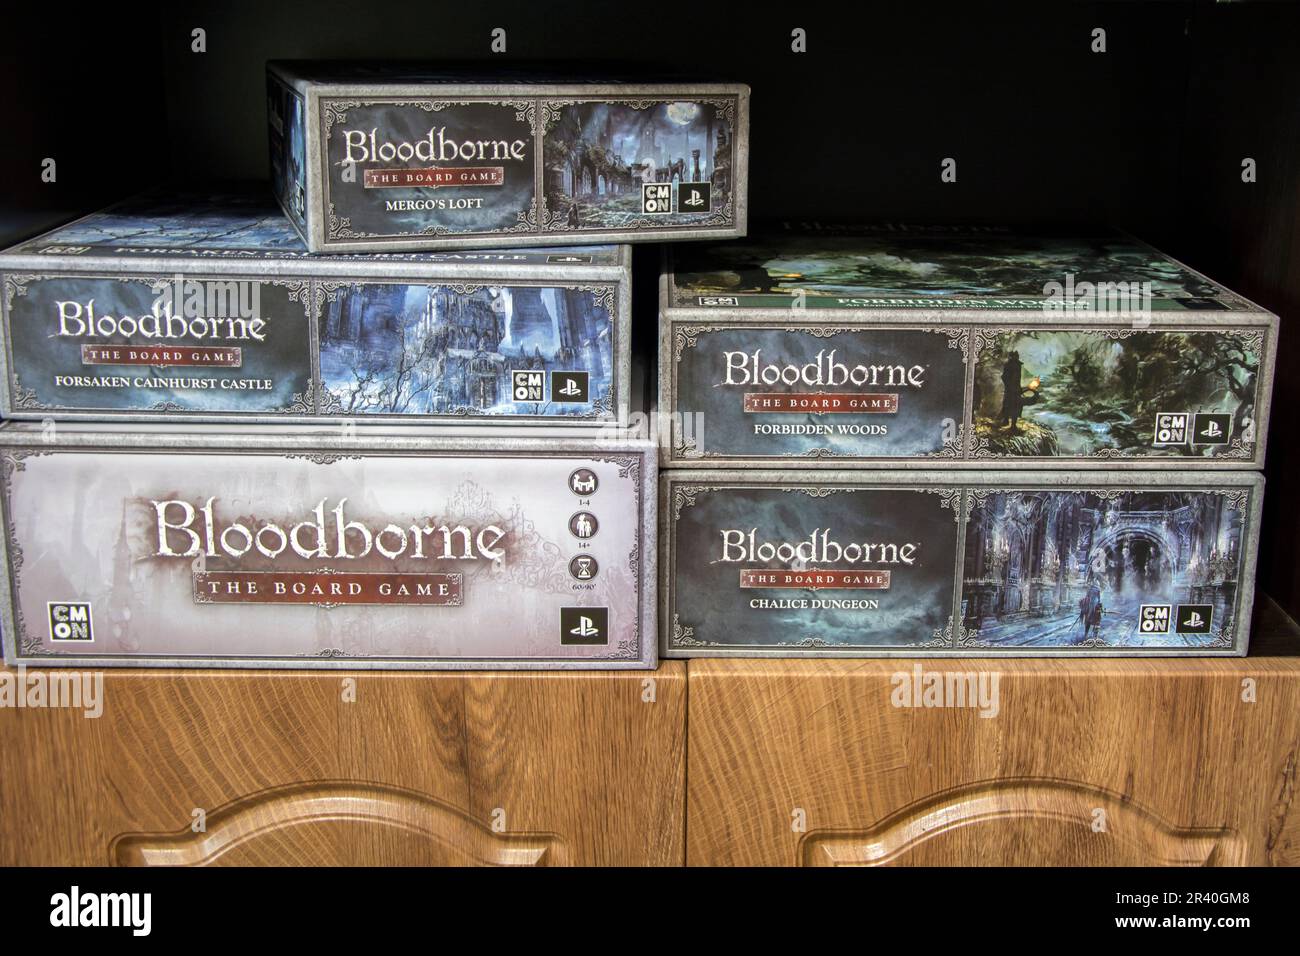 A collection of Bloodborne board games, five boxes - a core game and several expansions on a shelf. Stock Photo